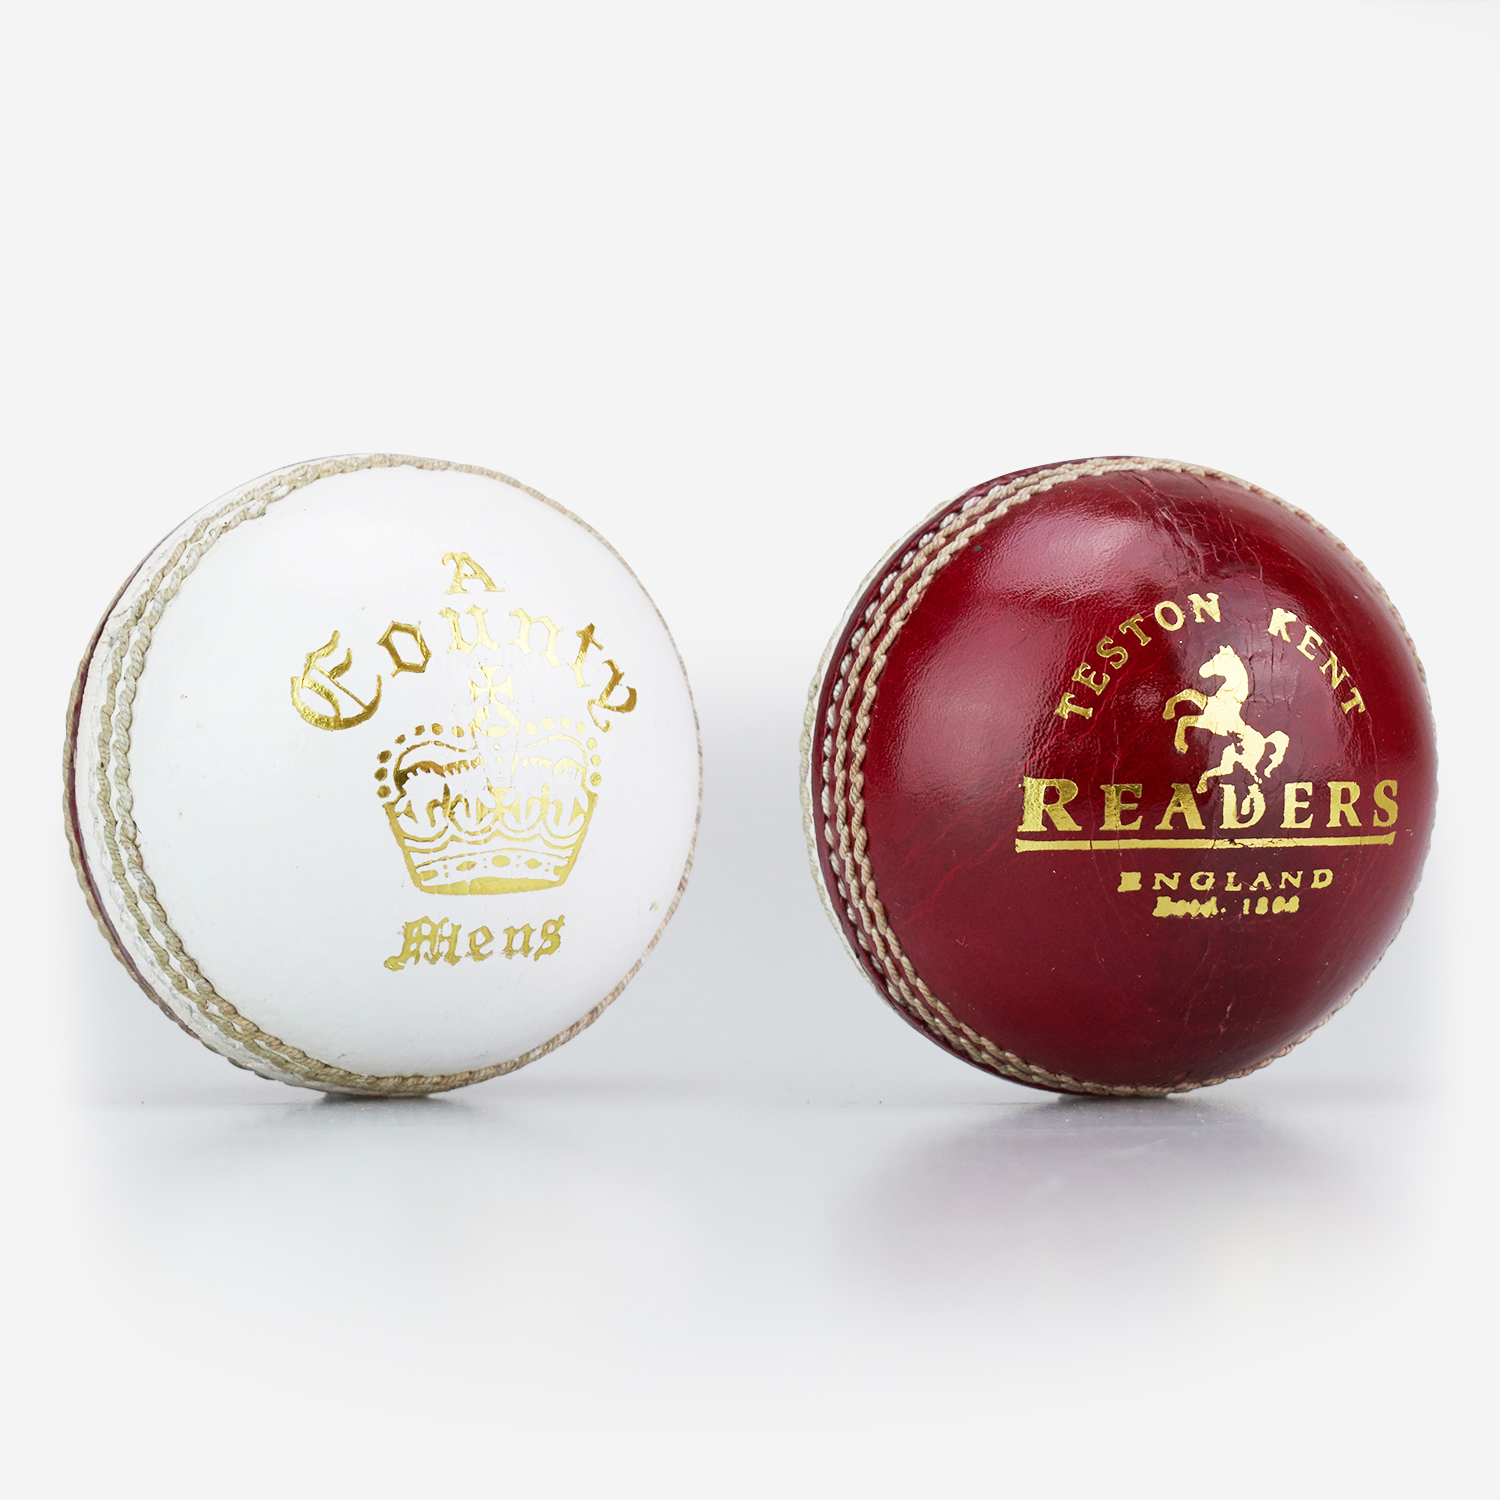 Readers County Crown Red & White Cricket Ball